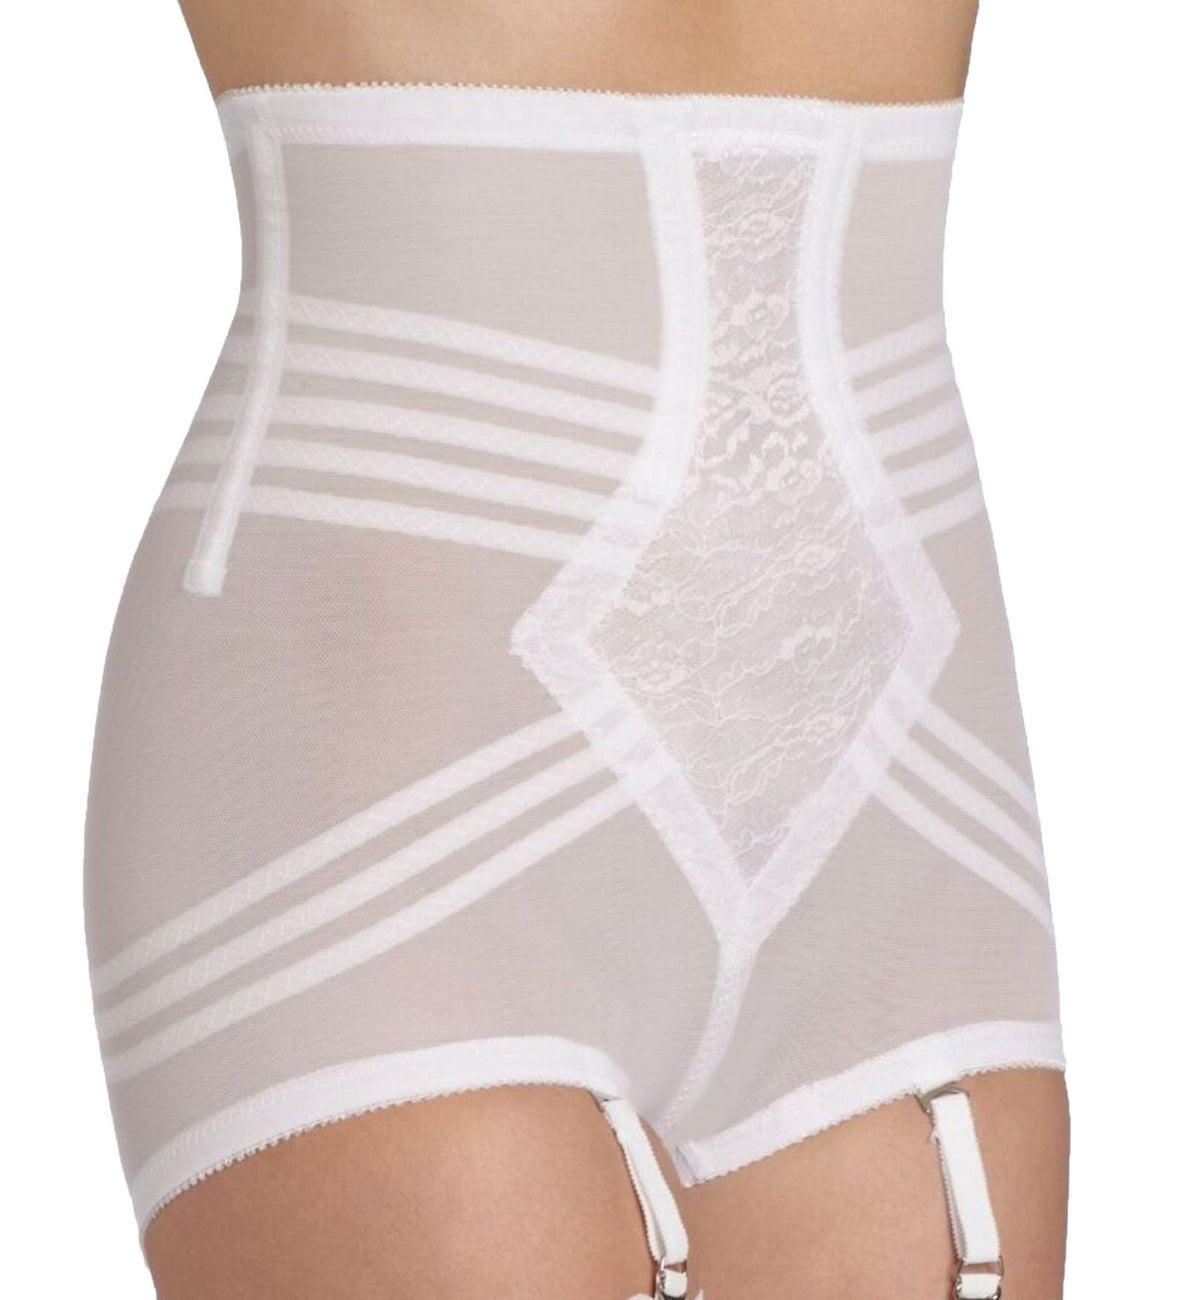 Rago Firm Control High Waist Shaping Panty (6109),Small,White - White,Small